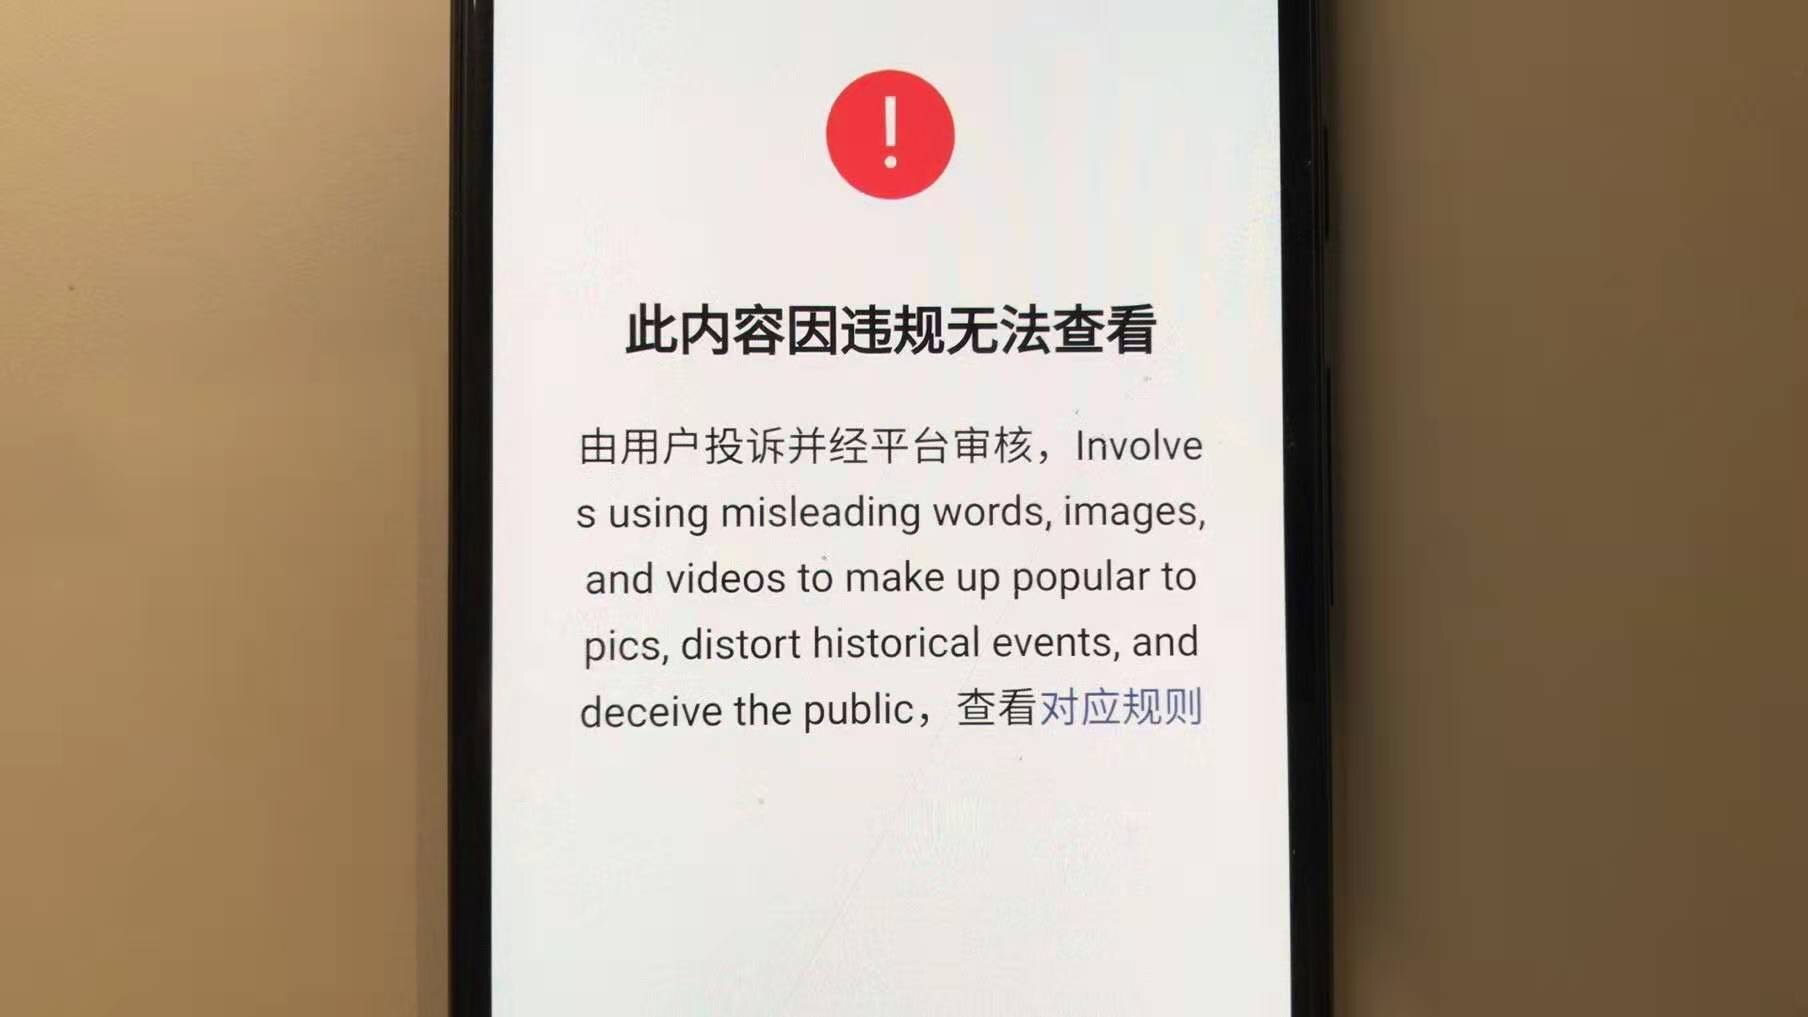 Warning after clicking Morrison's deleted WeChat article.